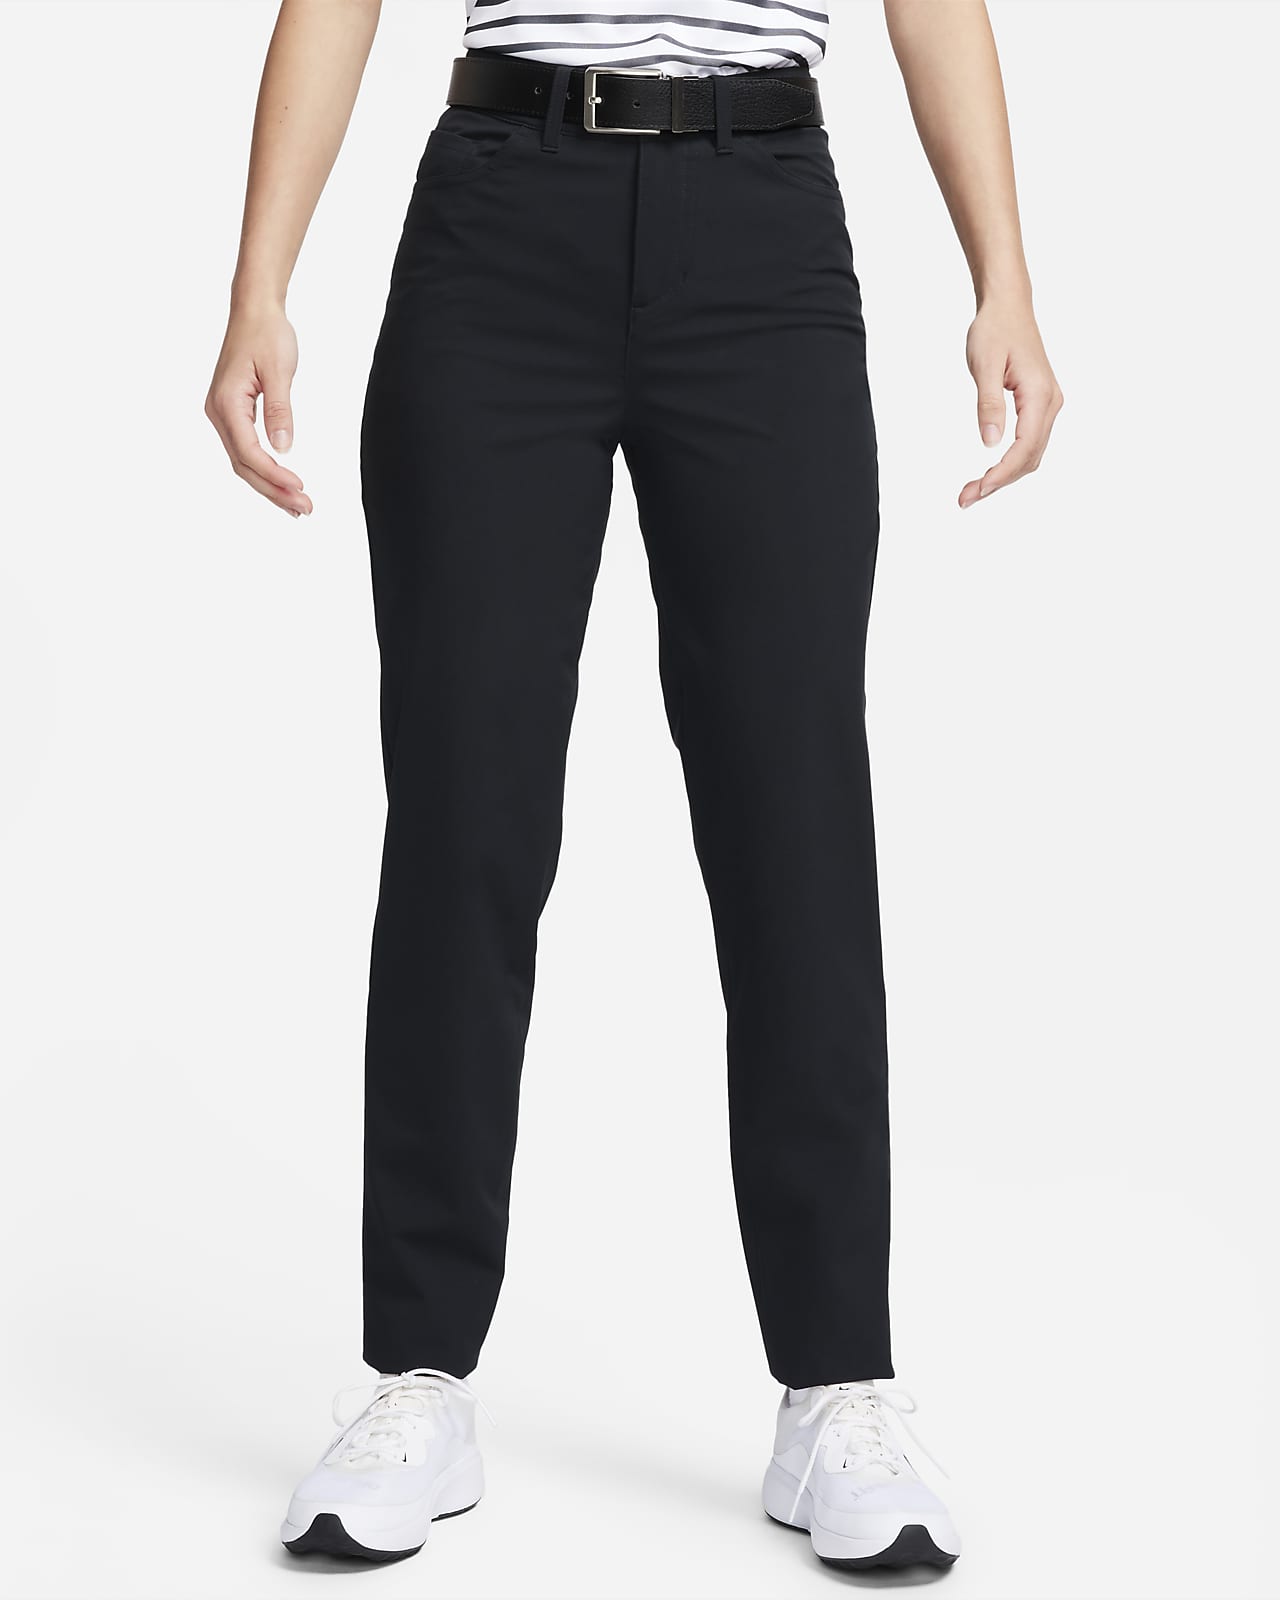 Women's Skinny Pants, Explore our New Arrivals